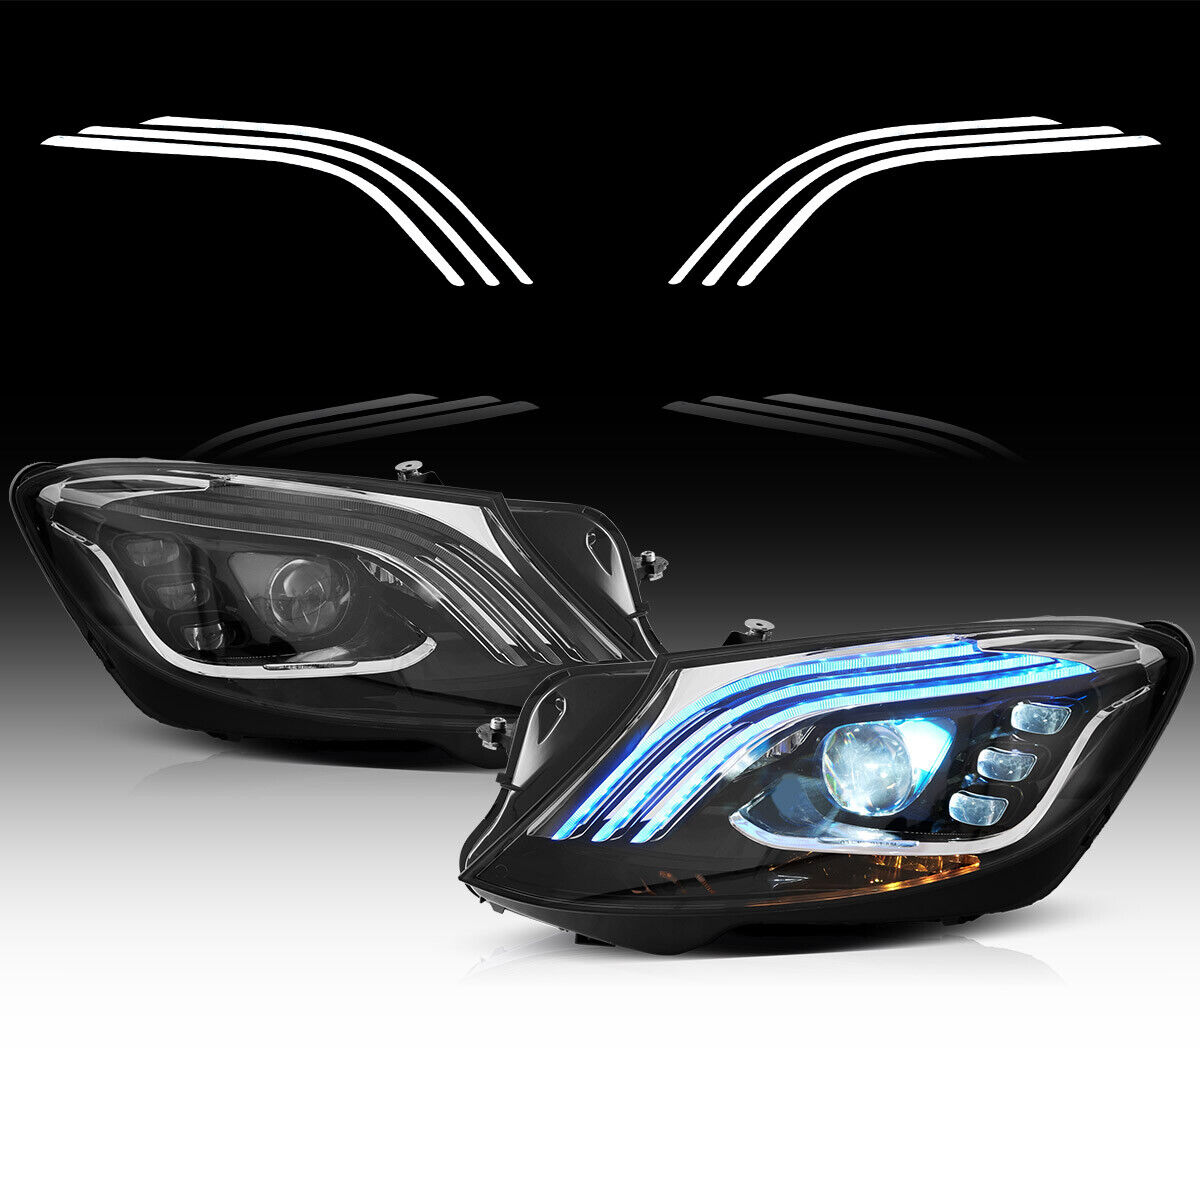 Upgrade 2018+ OE Style FULL LED Headlights DRL For 2014-17 Mercedes Benz S Class